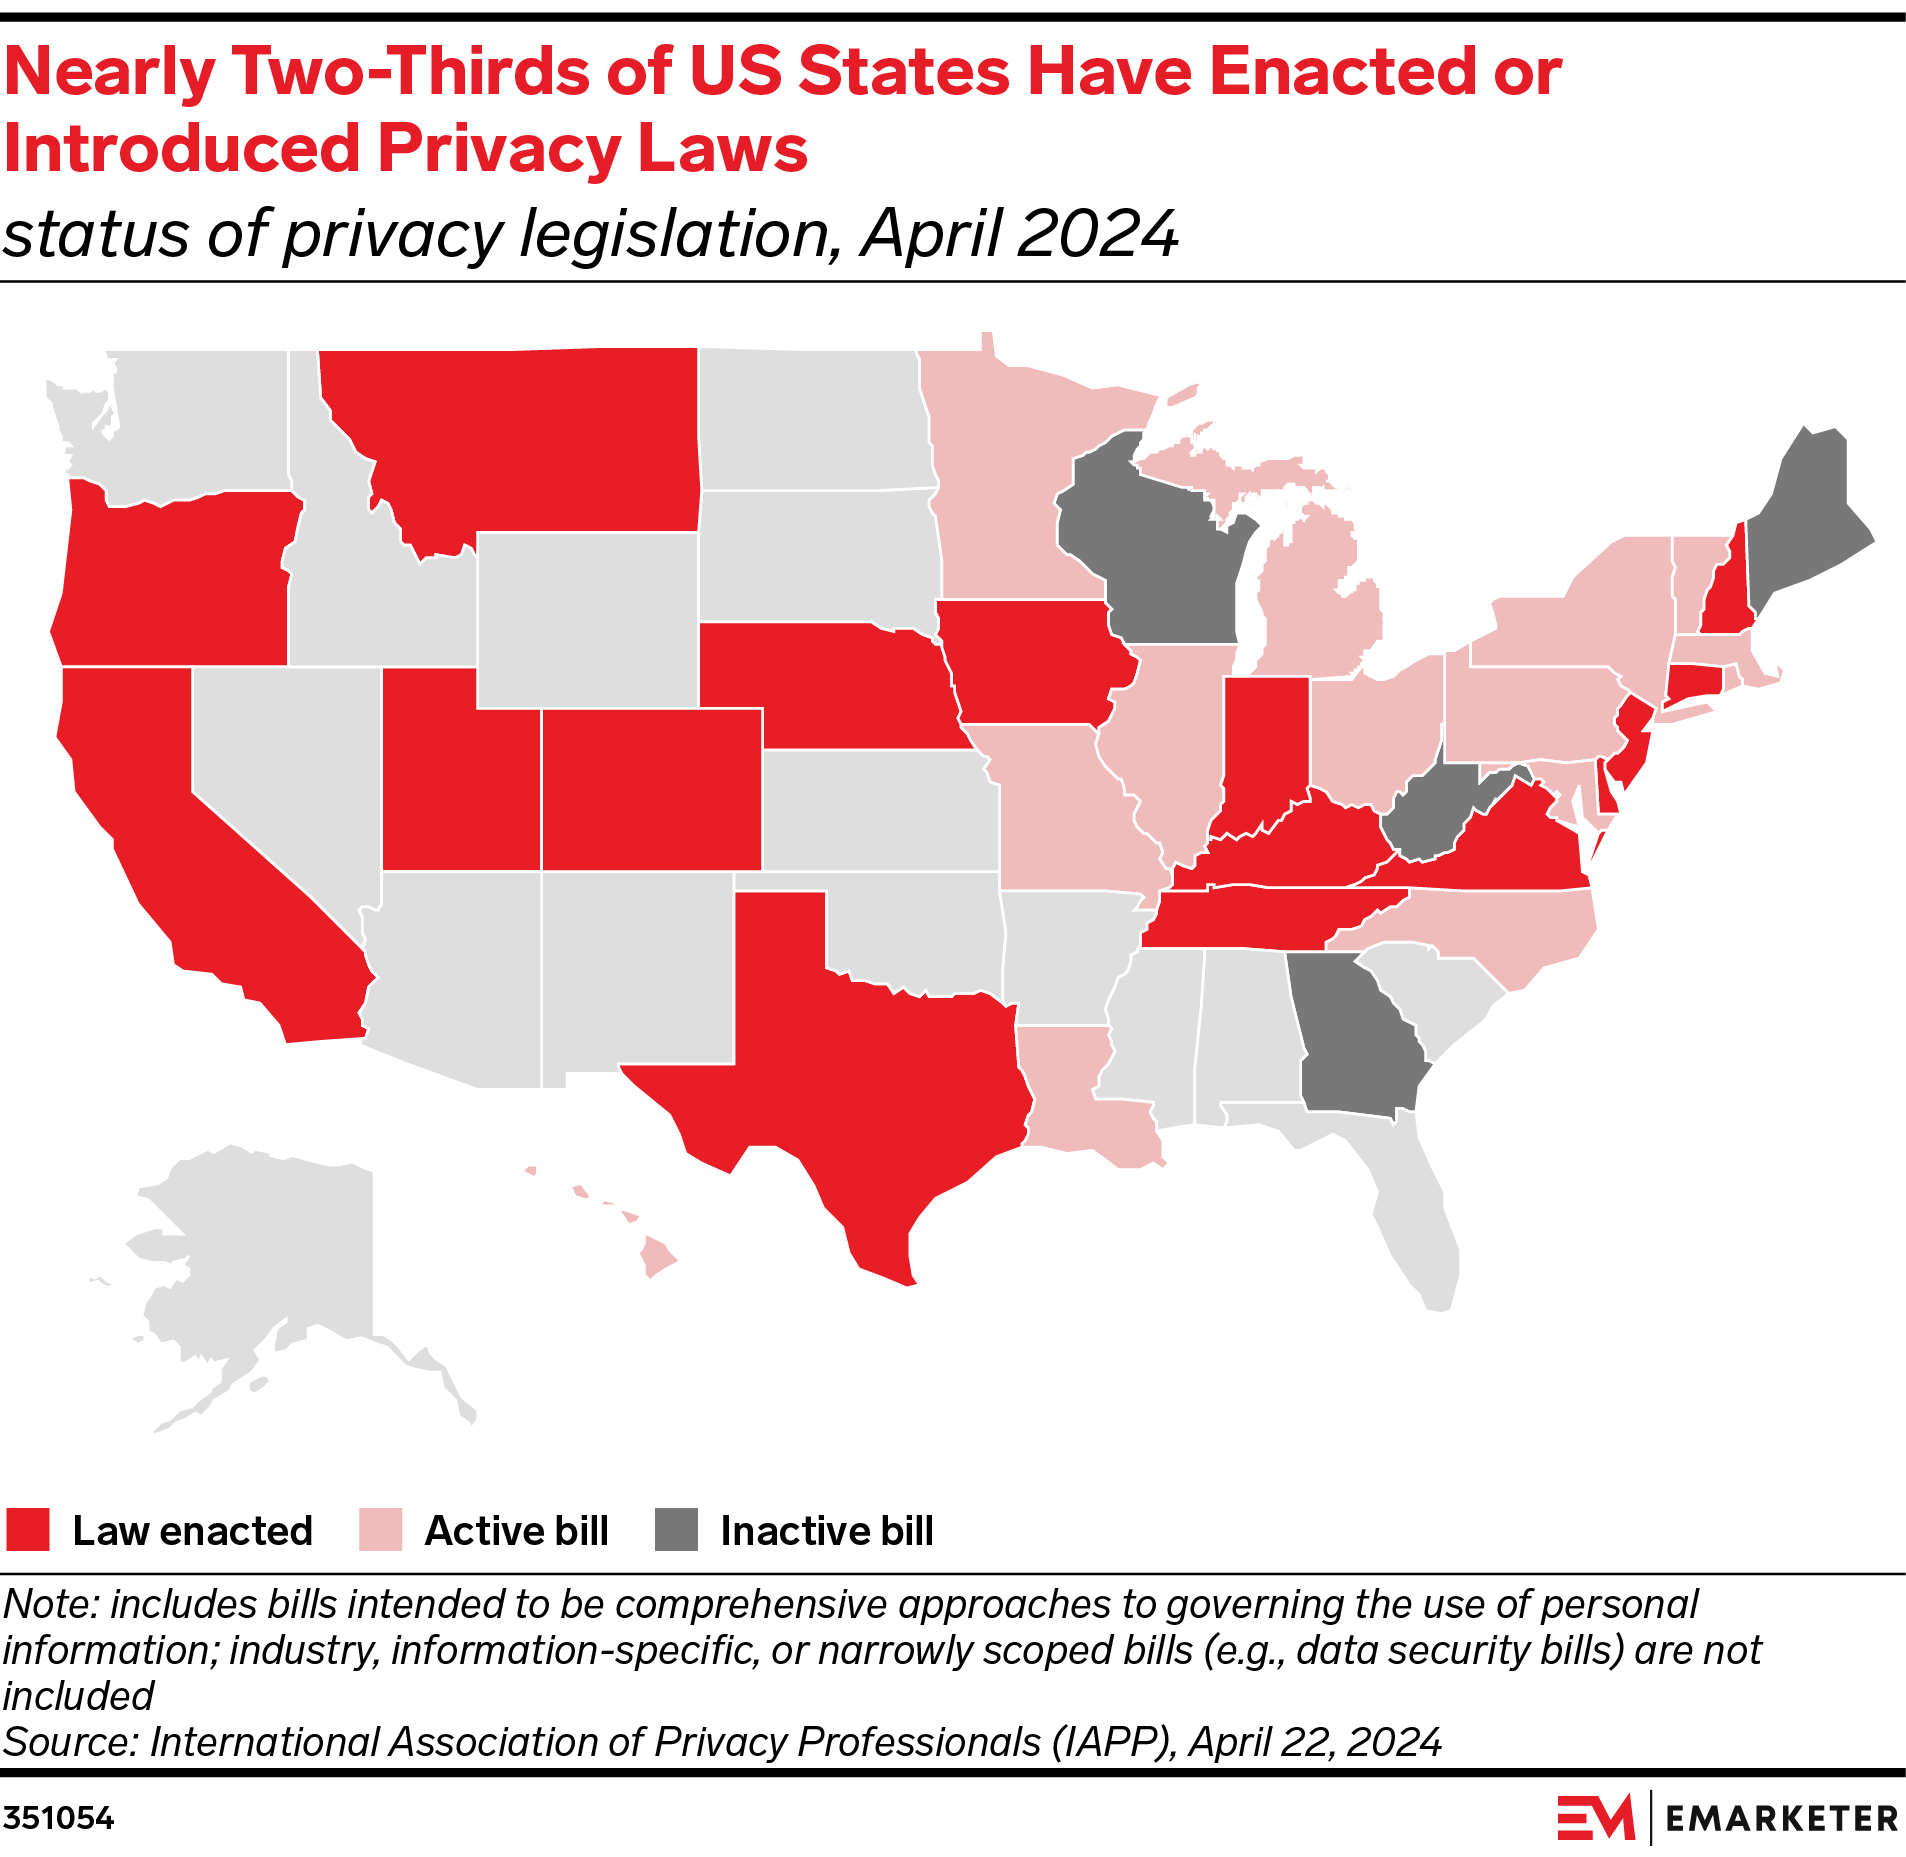 Nearly Two-Thirds of US States Have Enacted or Introduced Privacy Laws